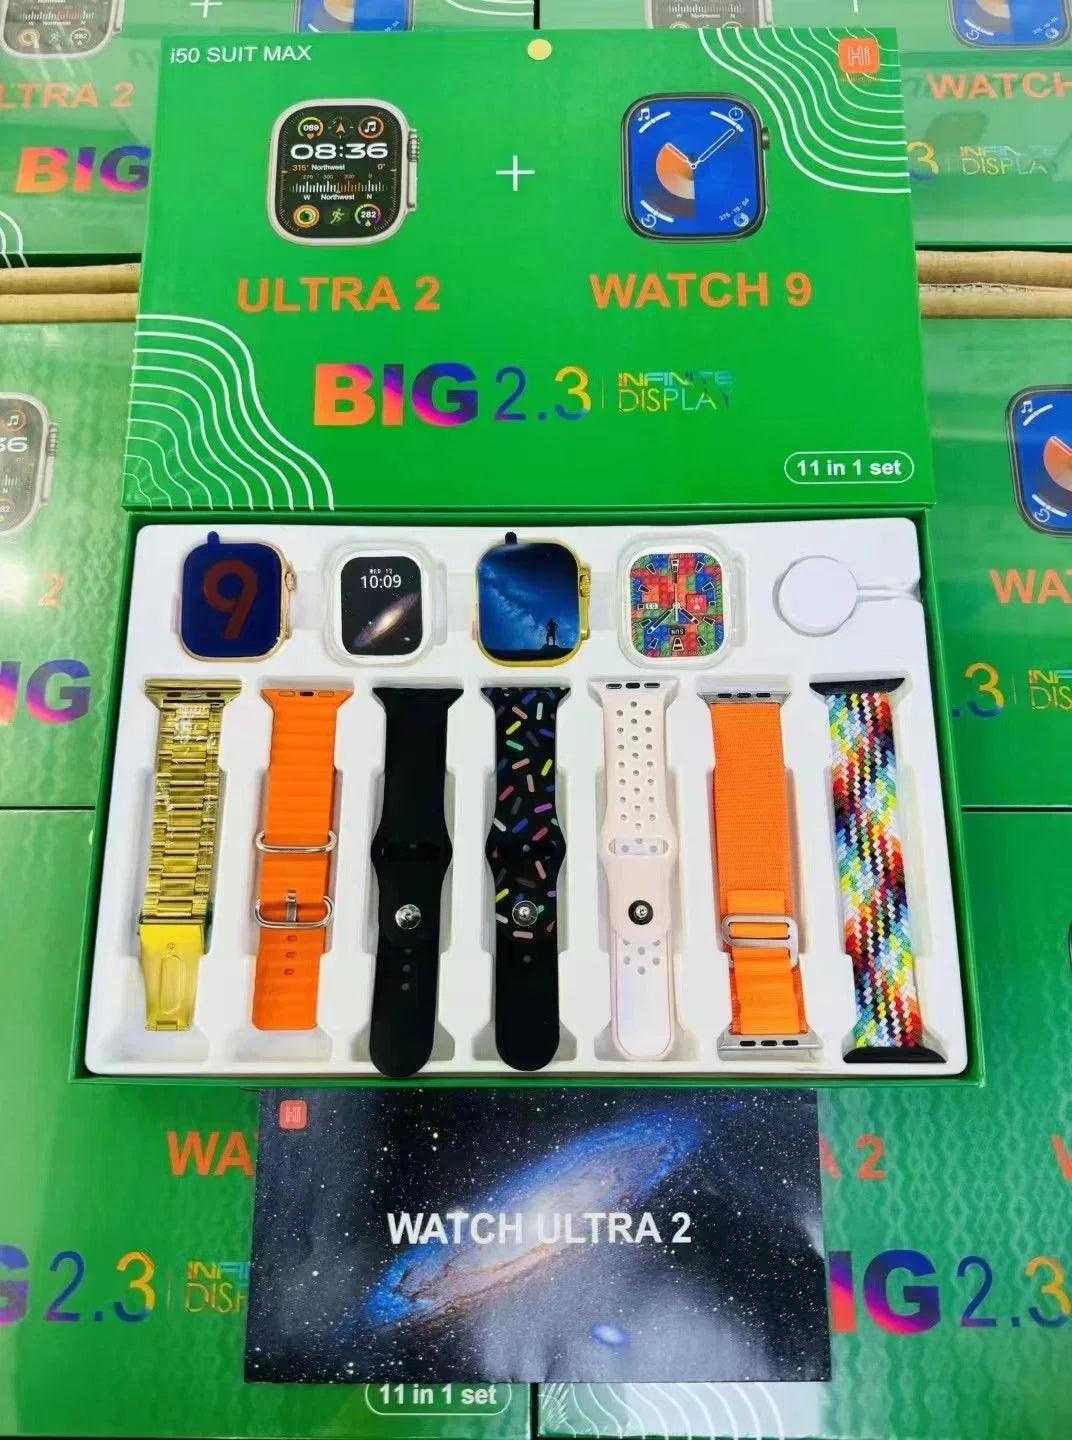 I50 Suit Max Ultra2 & Watch9 Dual Smart Watches - Basra Mobile Center